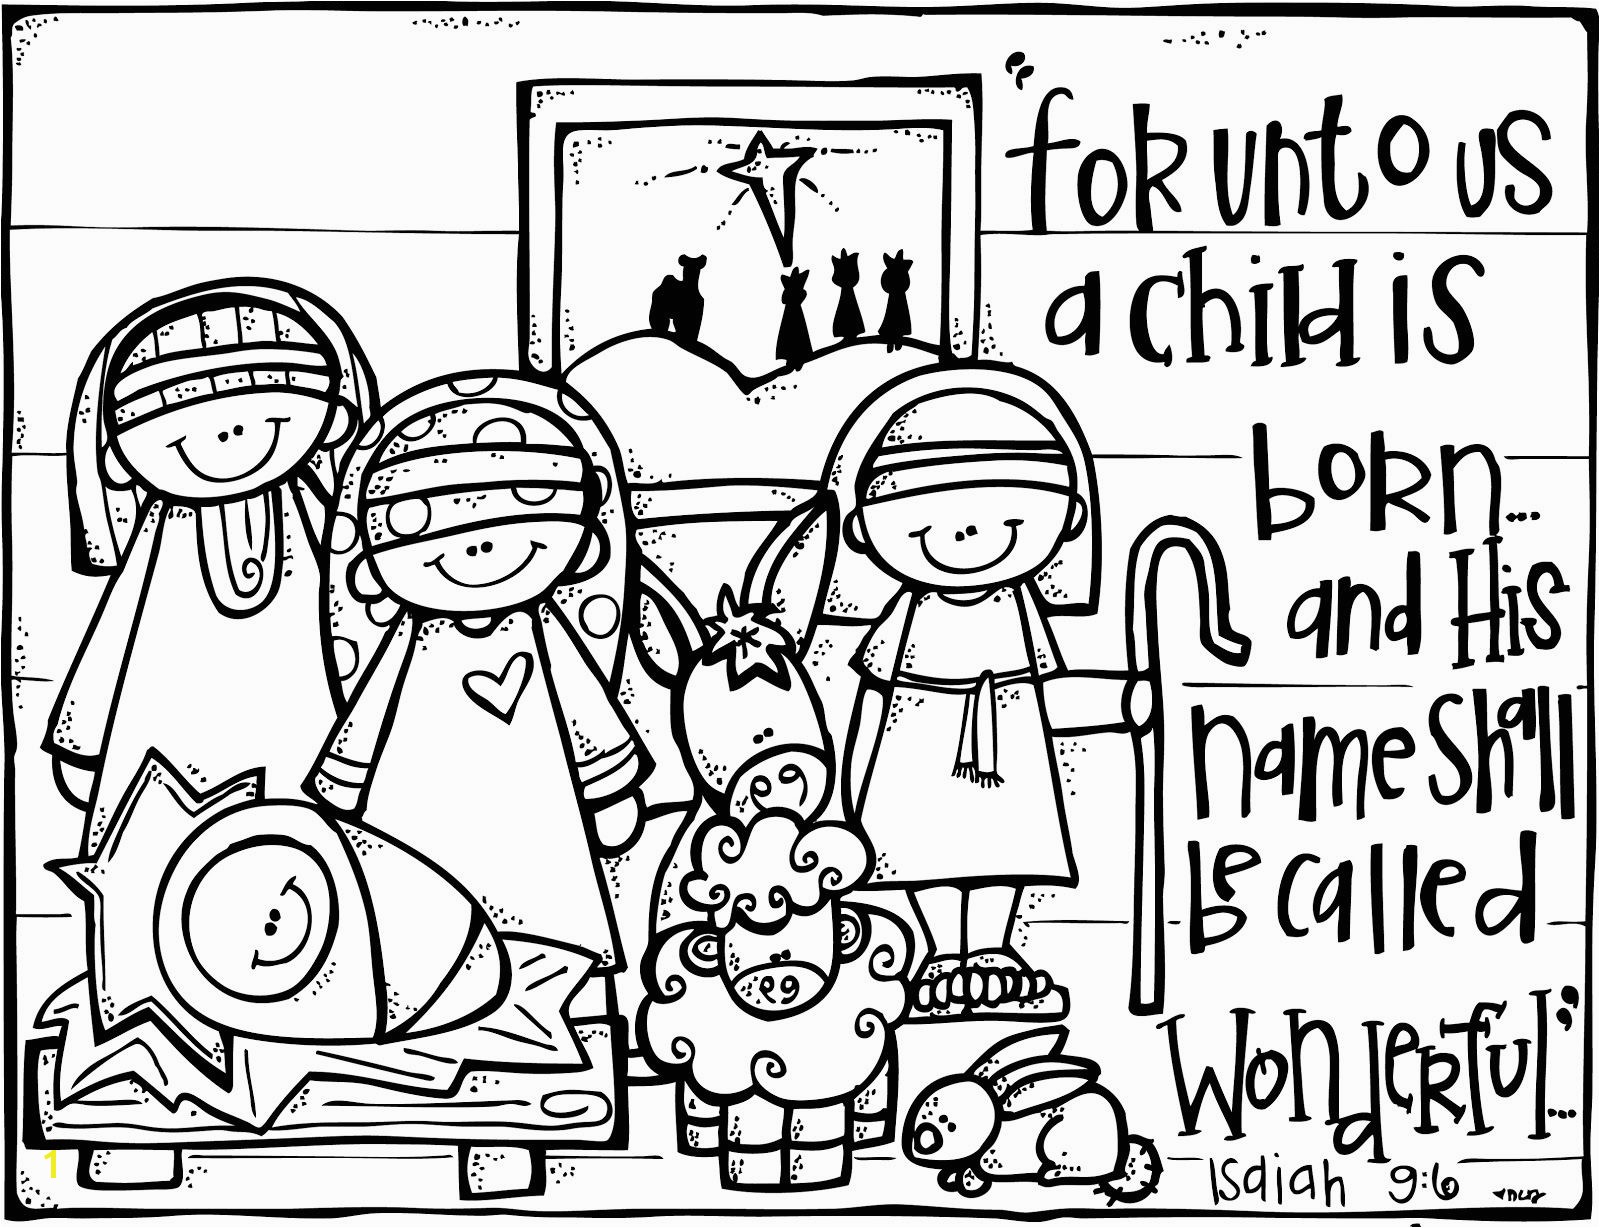 Christian Christmas Coloring Pages Christian Christmas Activities Free Nativity Coloring Page From